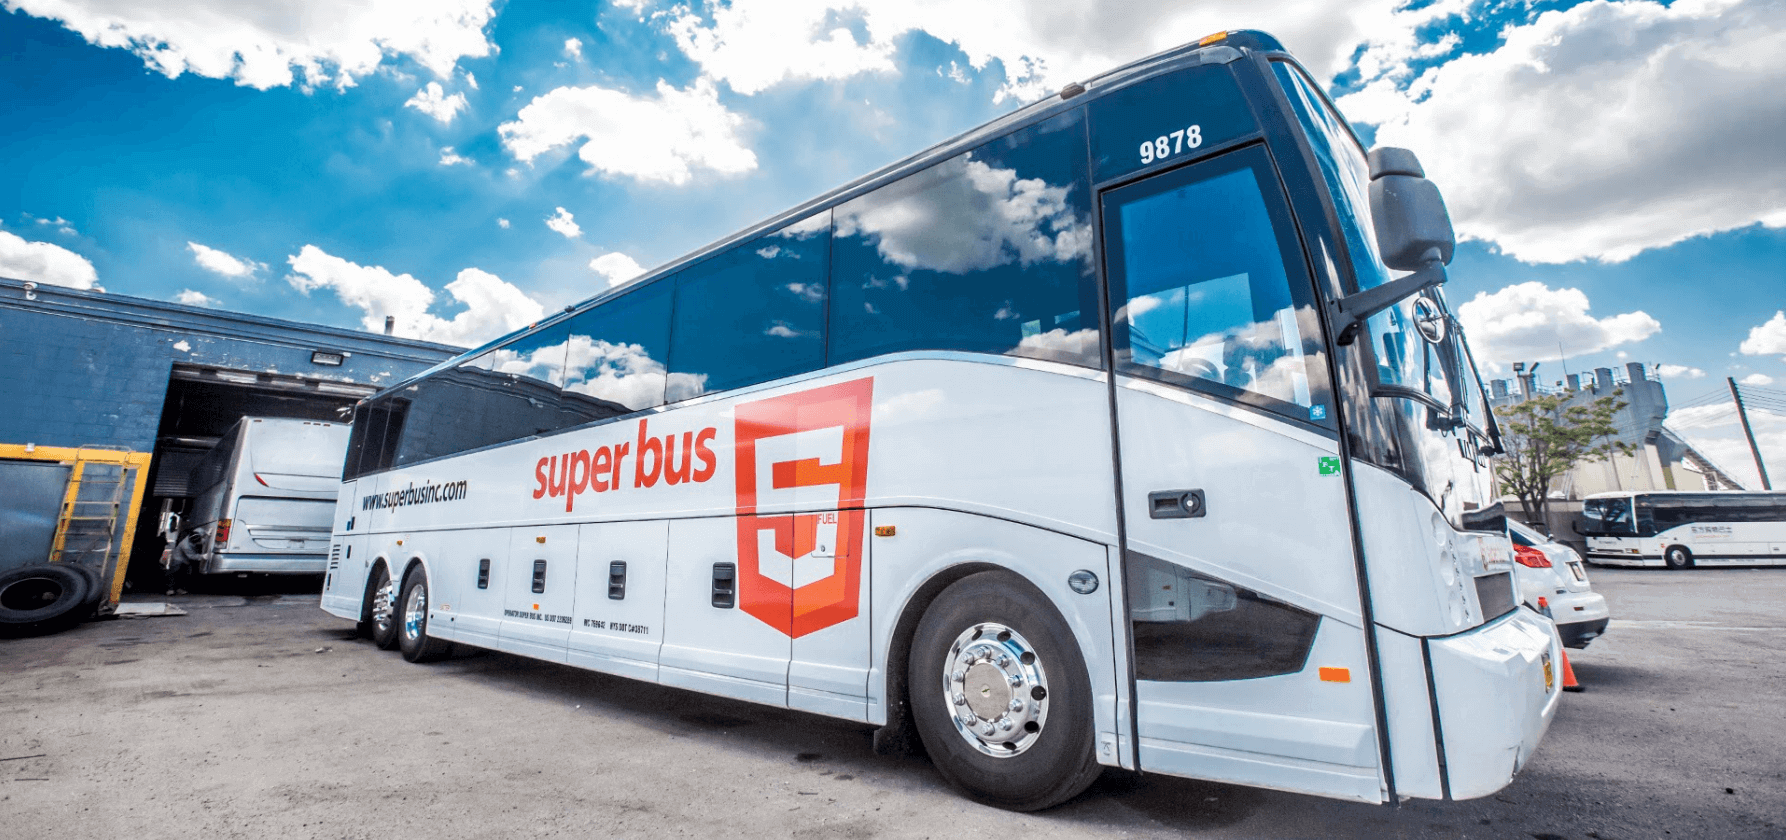 Picture of a Superbus inc. bus showing a variation of the HTML5 logo